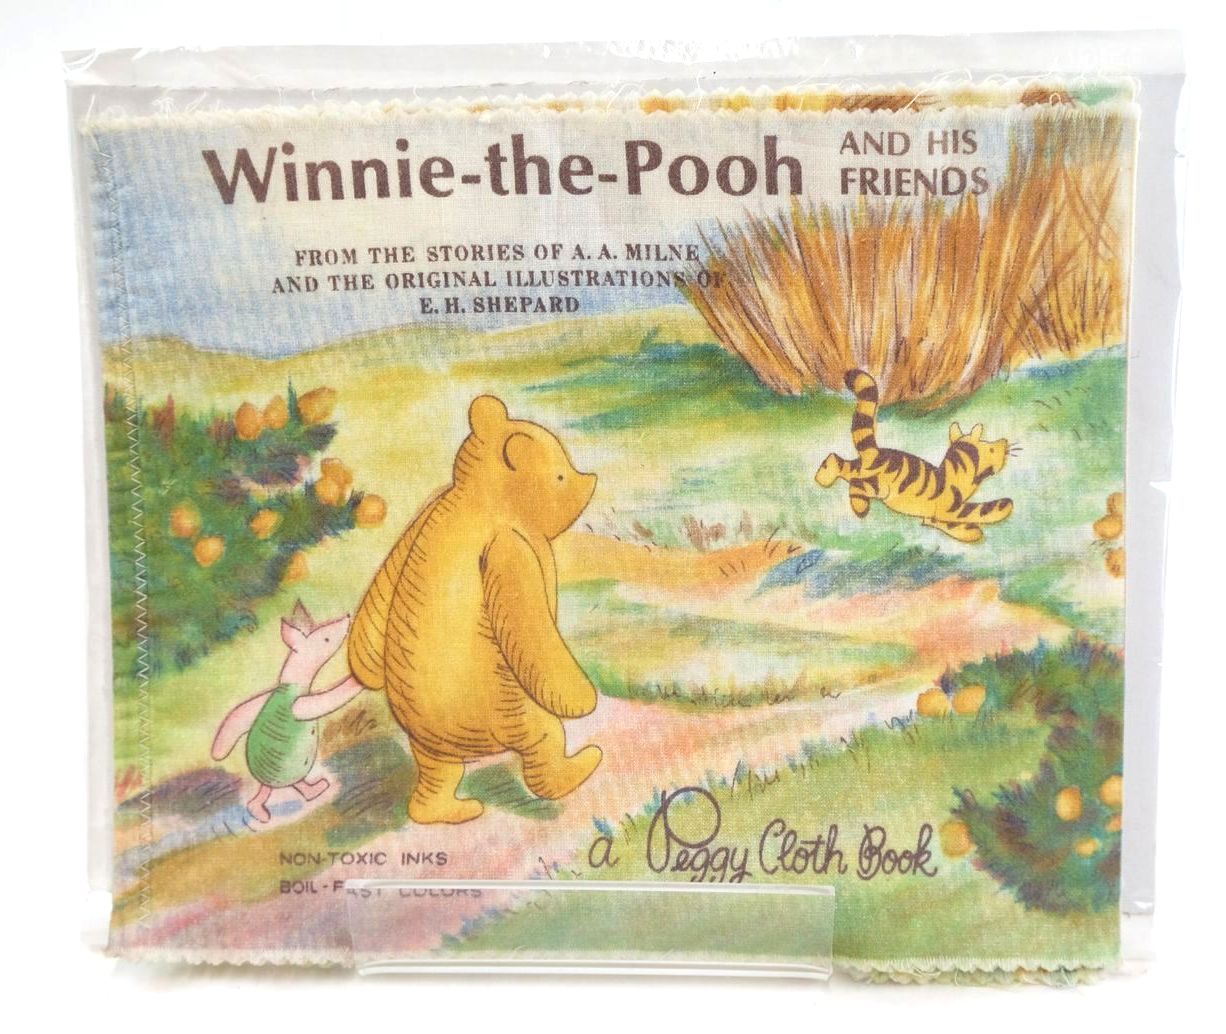 Photo of WINNIE-THE-POOH AND HIS FRIENDS written by Milne, A.A. illustrated by Shepard, E.H. published by Peggy Cloth Books, Inc. (STOCK CODE: 1325180)  for sale by Stella & Rose's Books